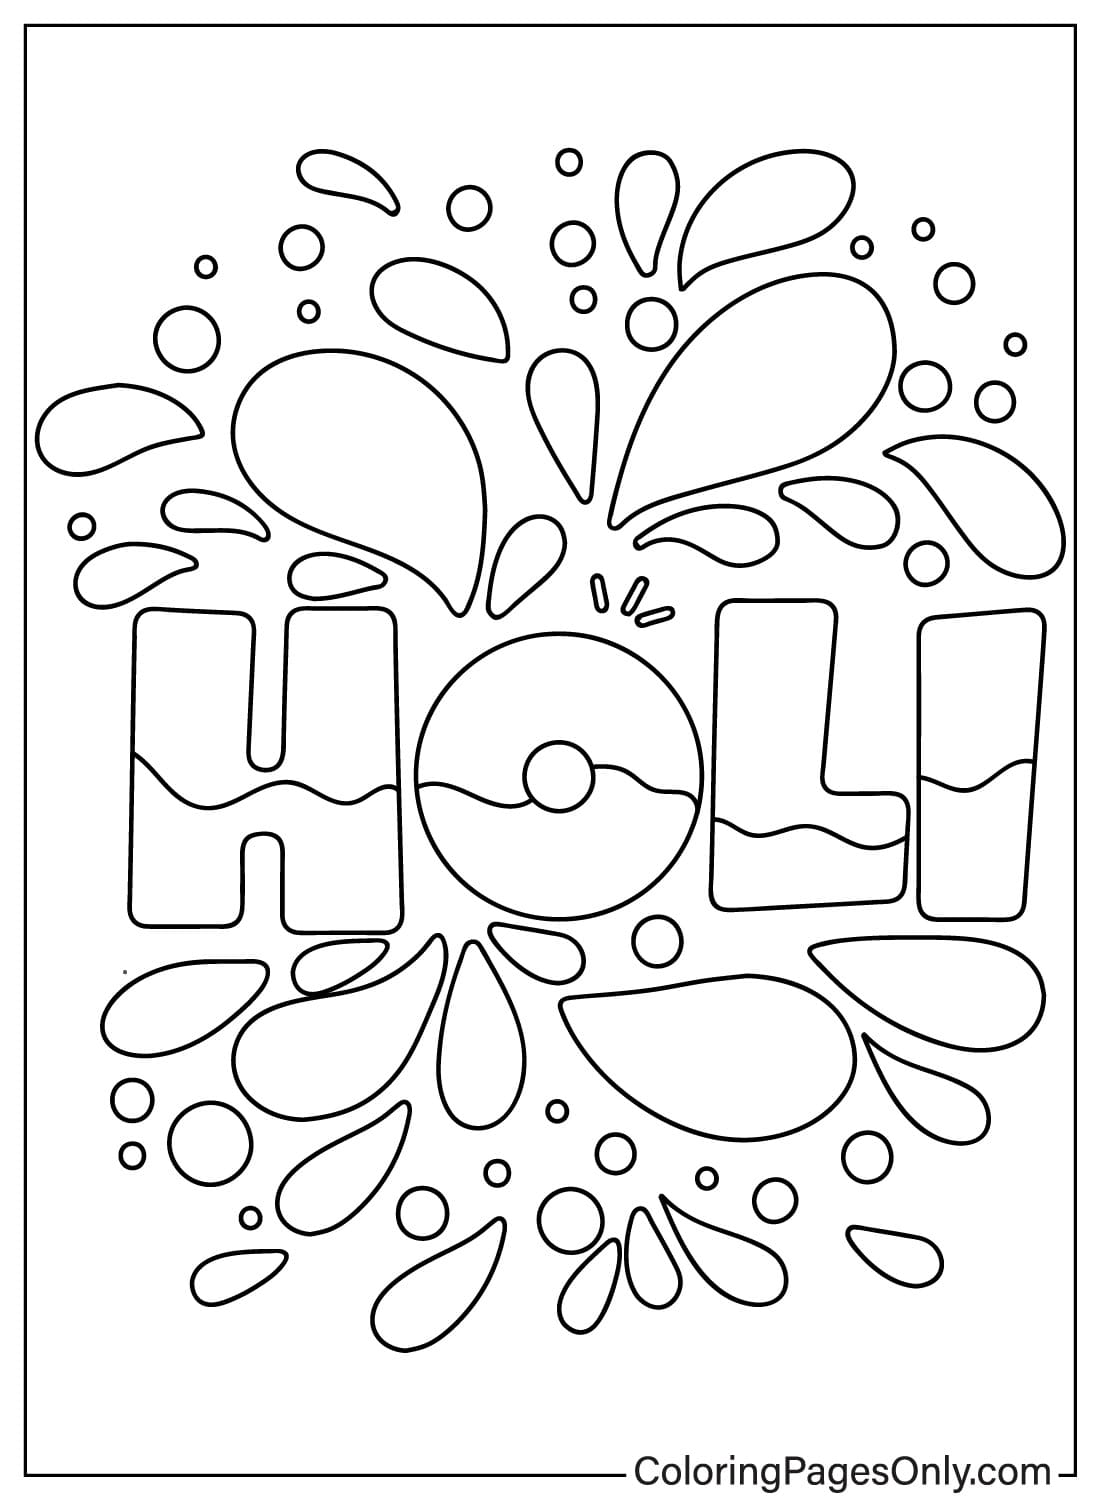 Holi Coloring Page to Print from Holi